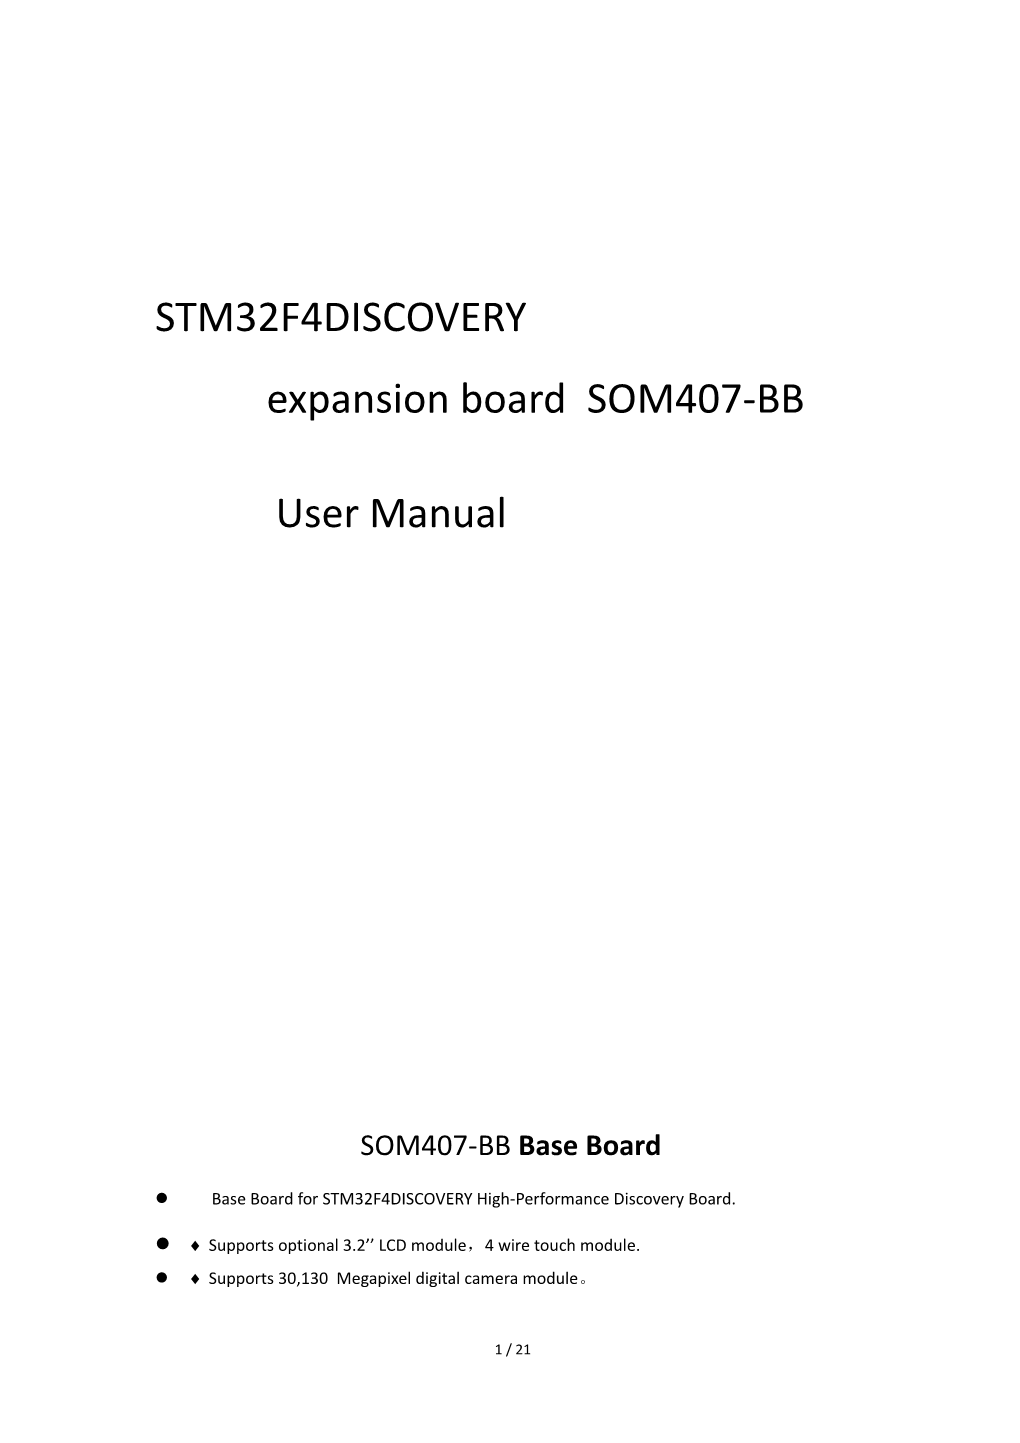 Base Board for STM32F4DISCOVERY High-Performance Discovery Board